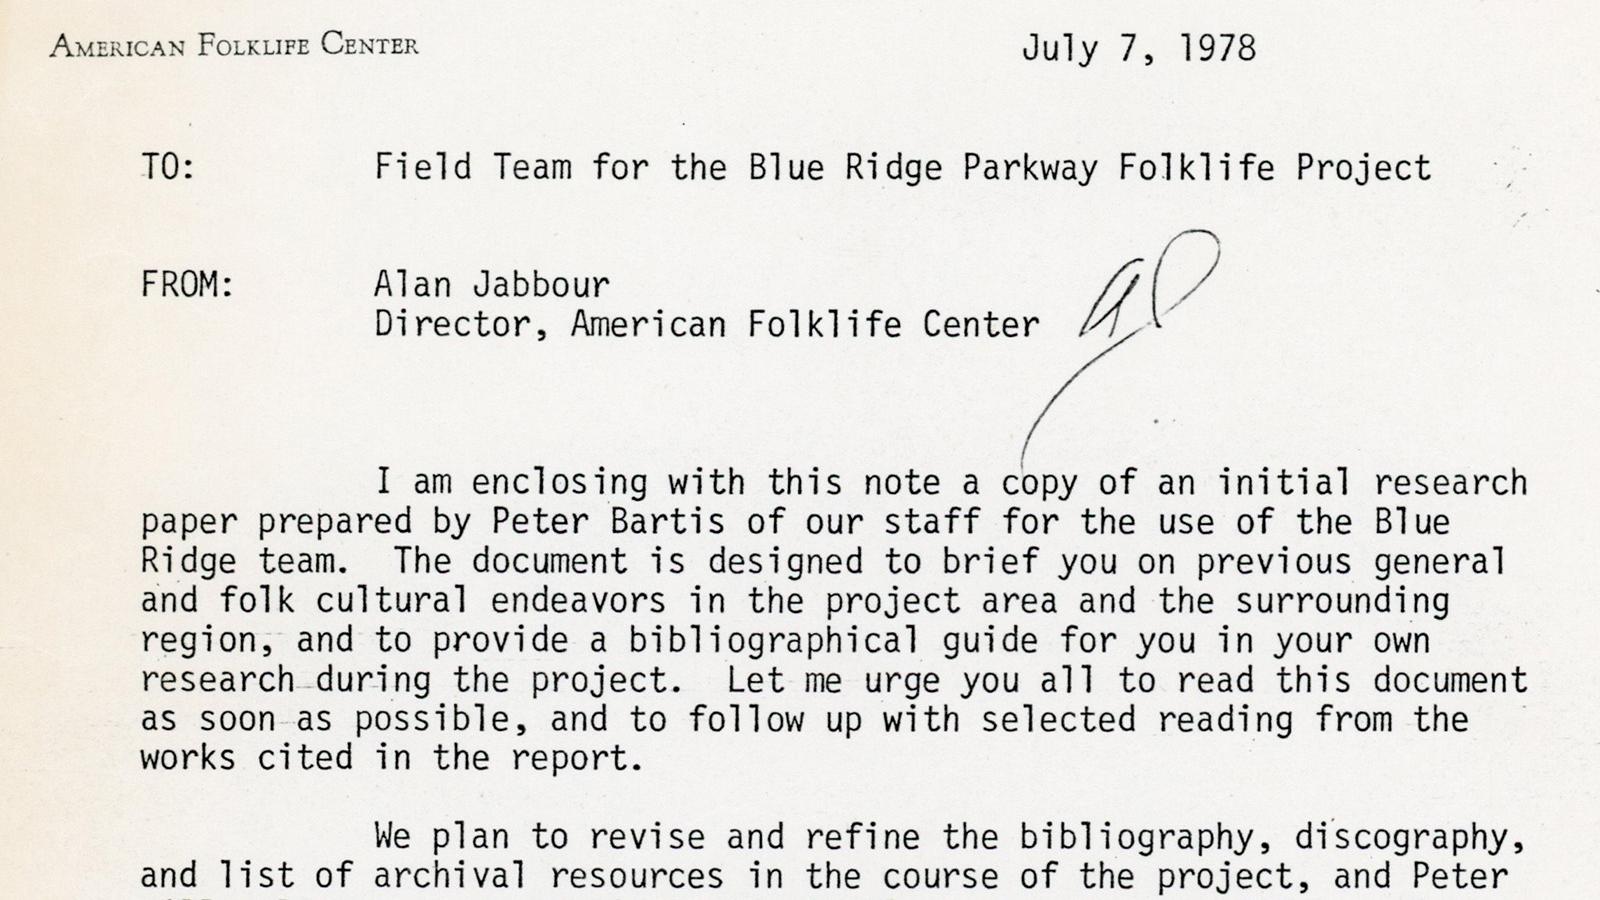 Letter from Alan Jabbour, Director of the American Folklife Center to the Field Team for the Blue Ridge Parkway Folklife Project from July 7, 1978 regarding initial research prepared by Peter Bartis.